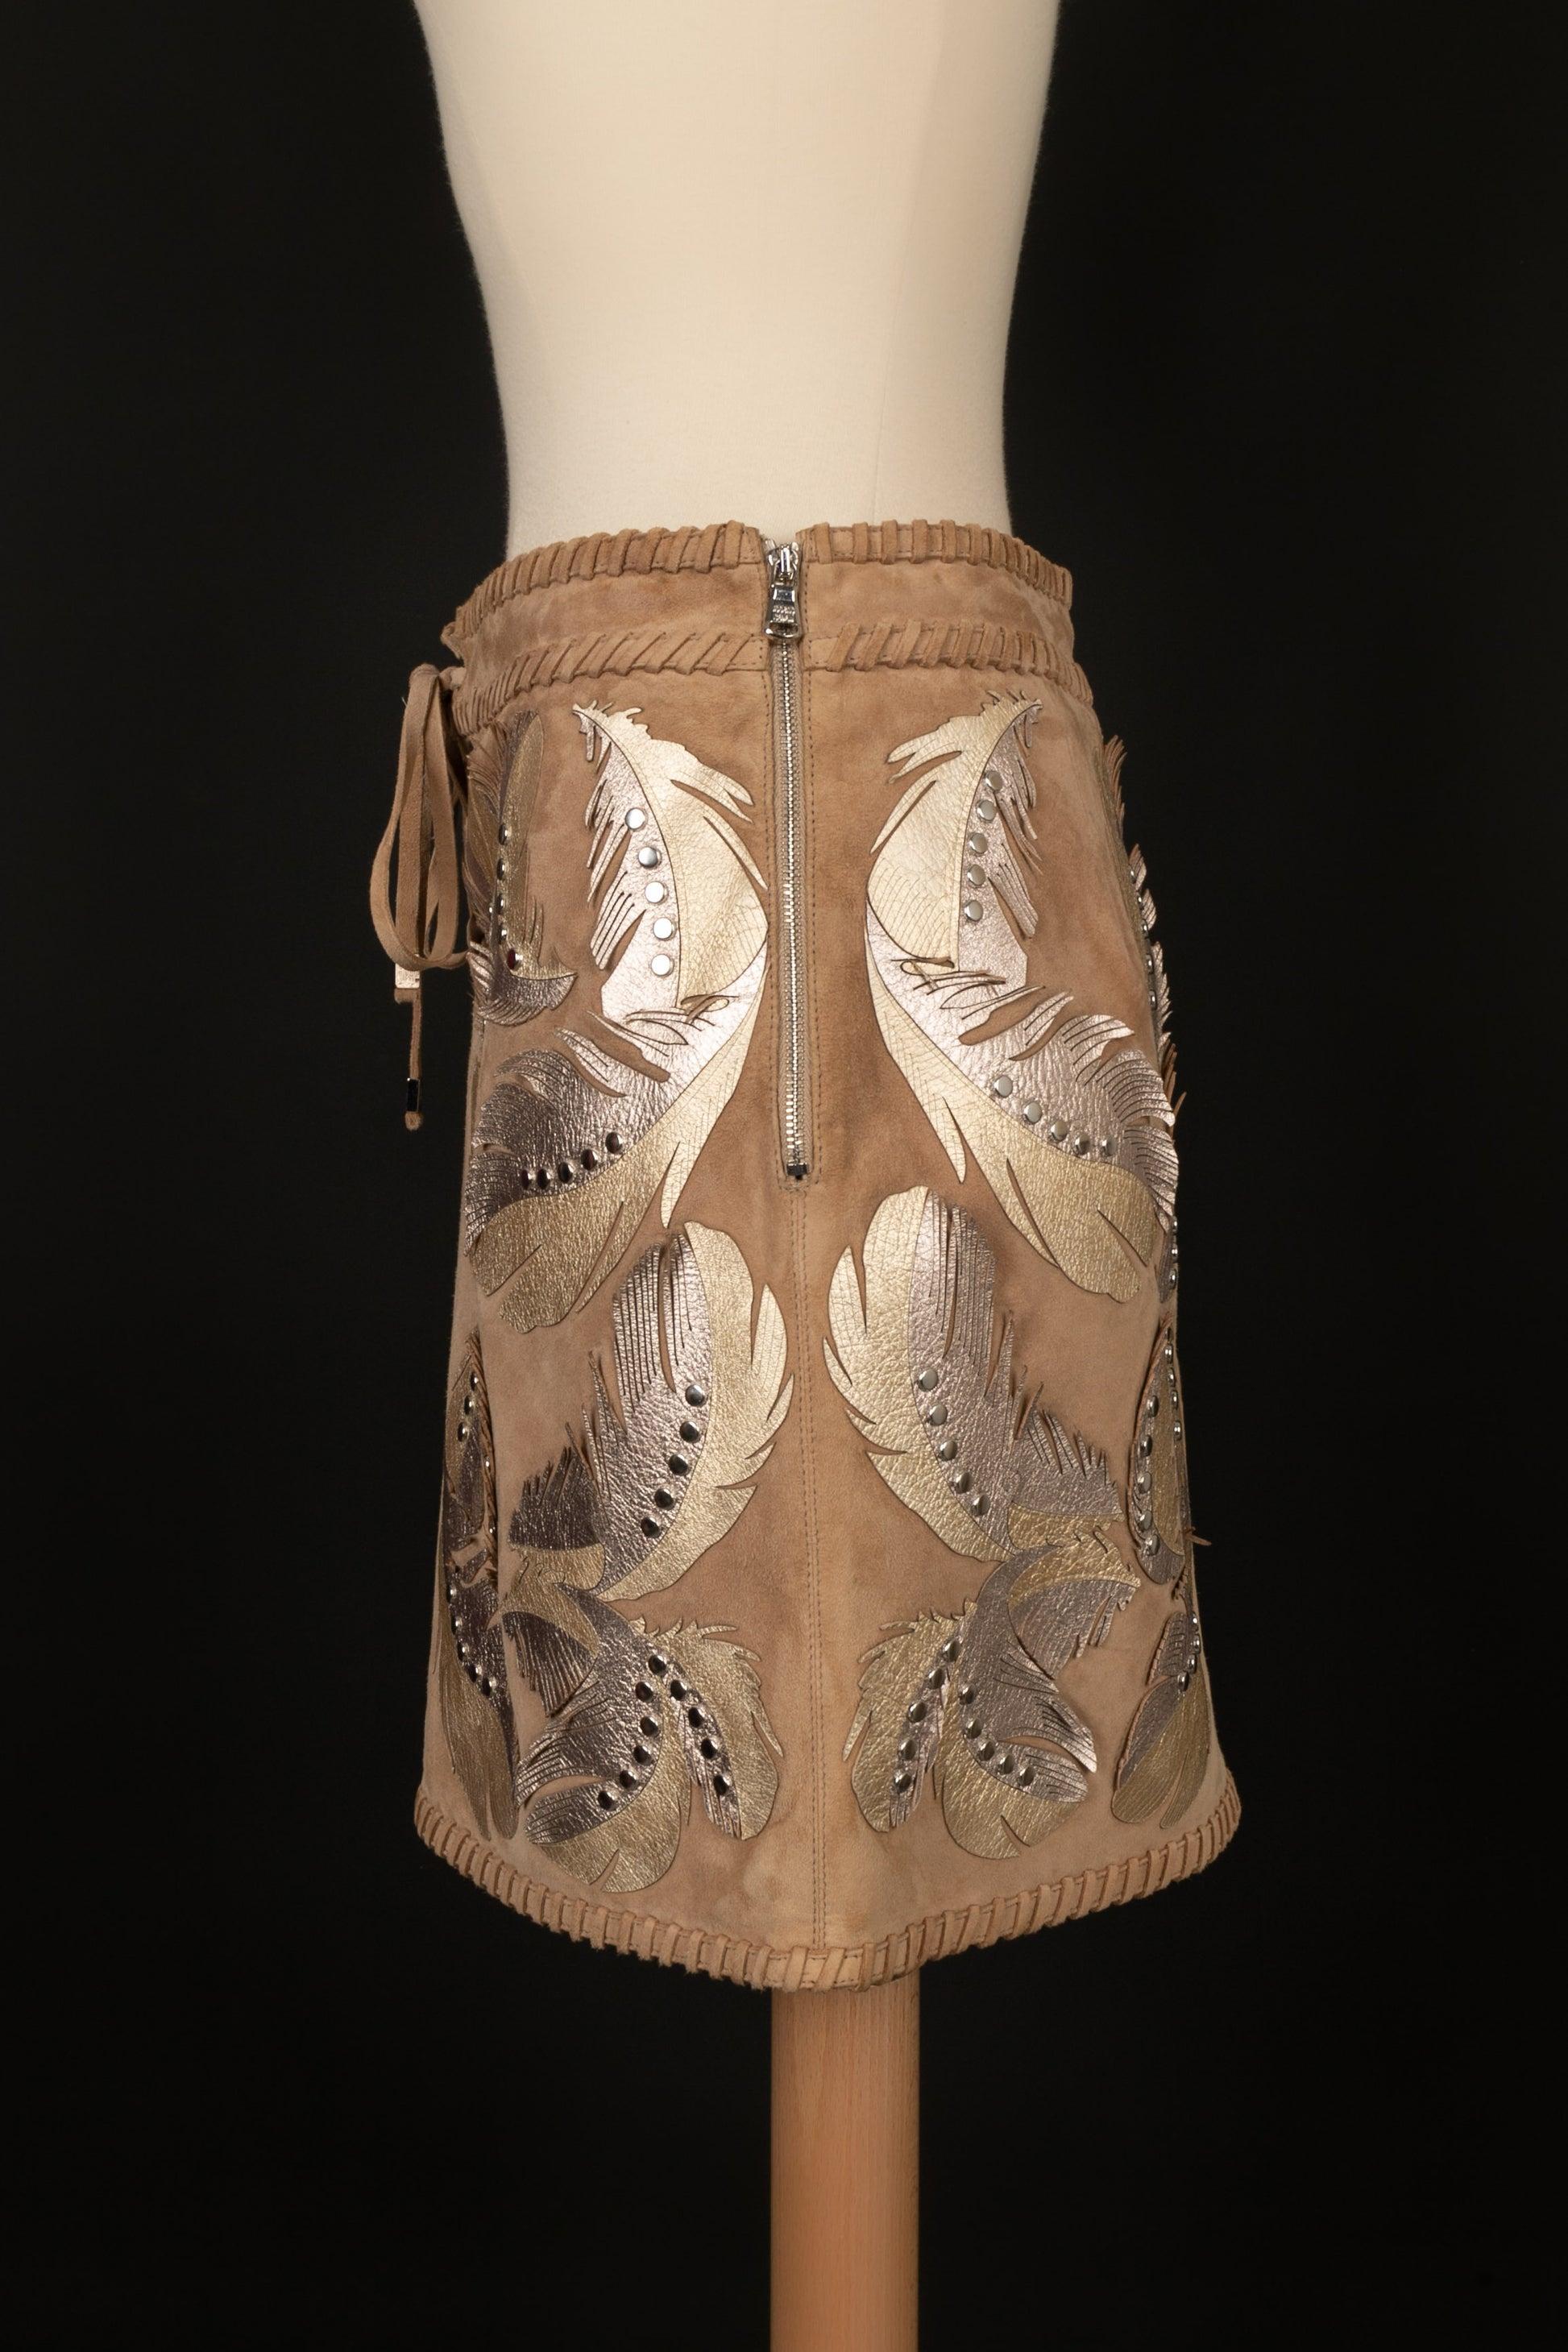 Cavalli - (Made in Italy) Fringed golden leather and suede skirt. Size 38.

Additional information:
Condition: Very good condition
Dimensions: Waist: 34 cm - Length: 40 cm

Seller Reference: FJ8
